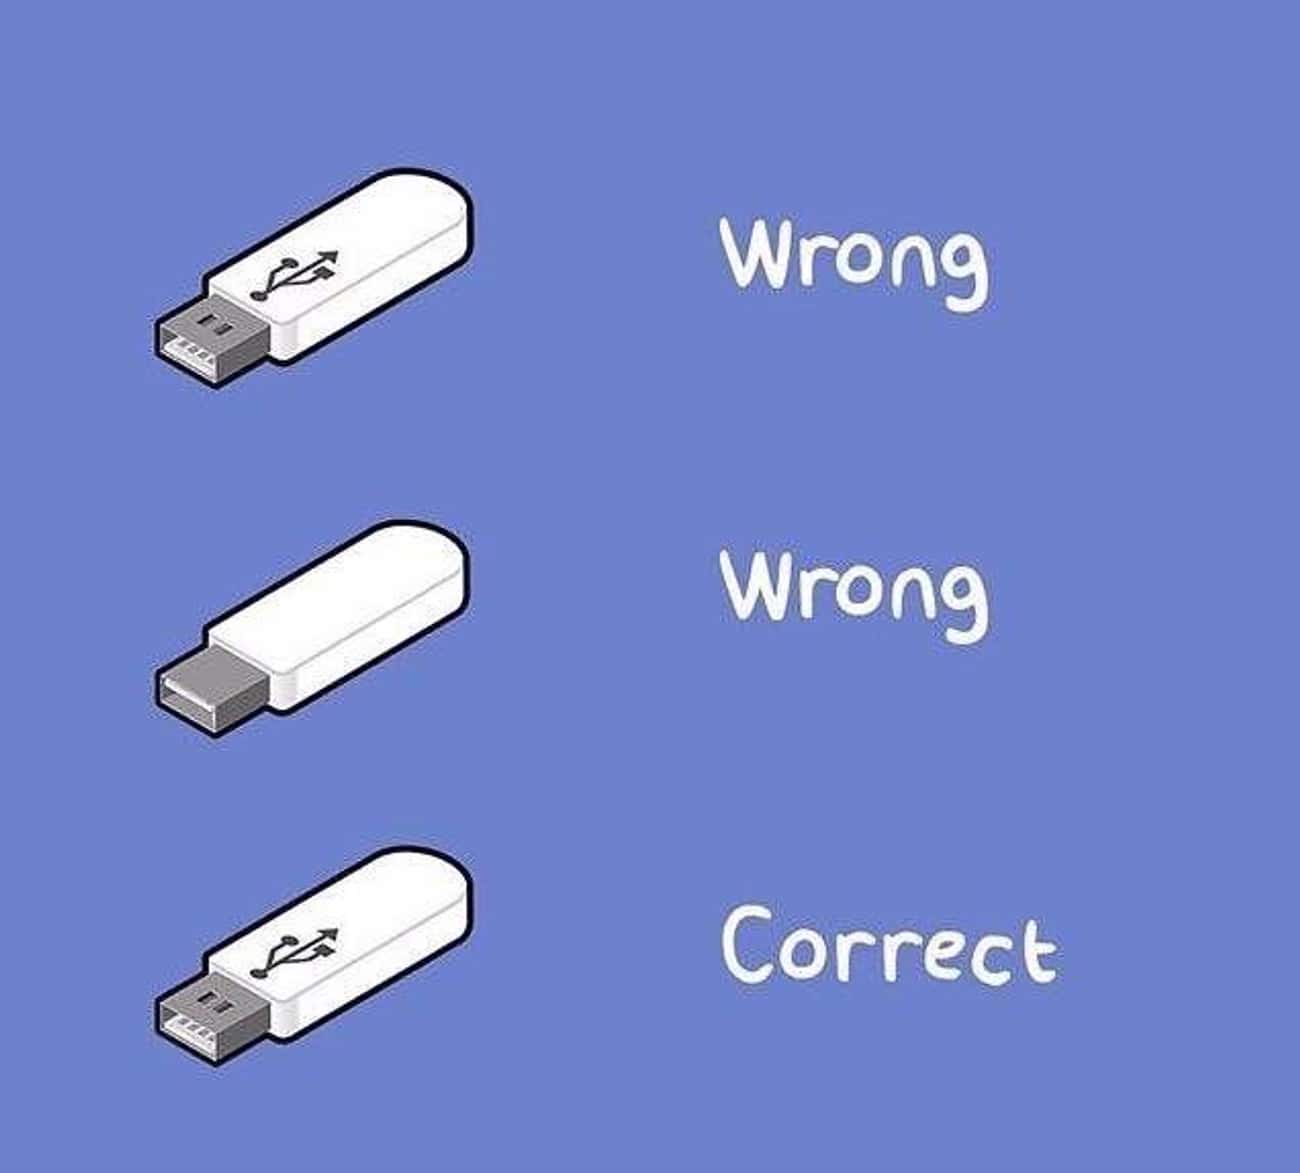 Never Getting The USB Right On The First Try